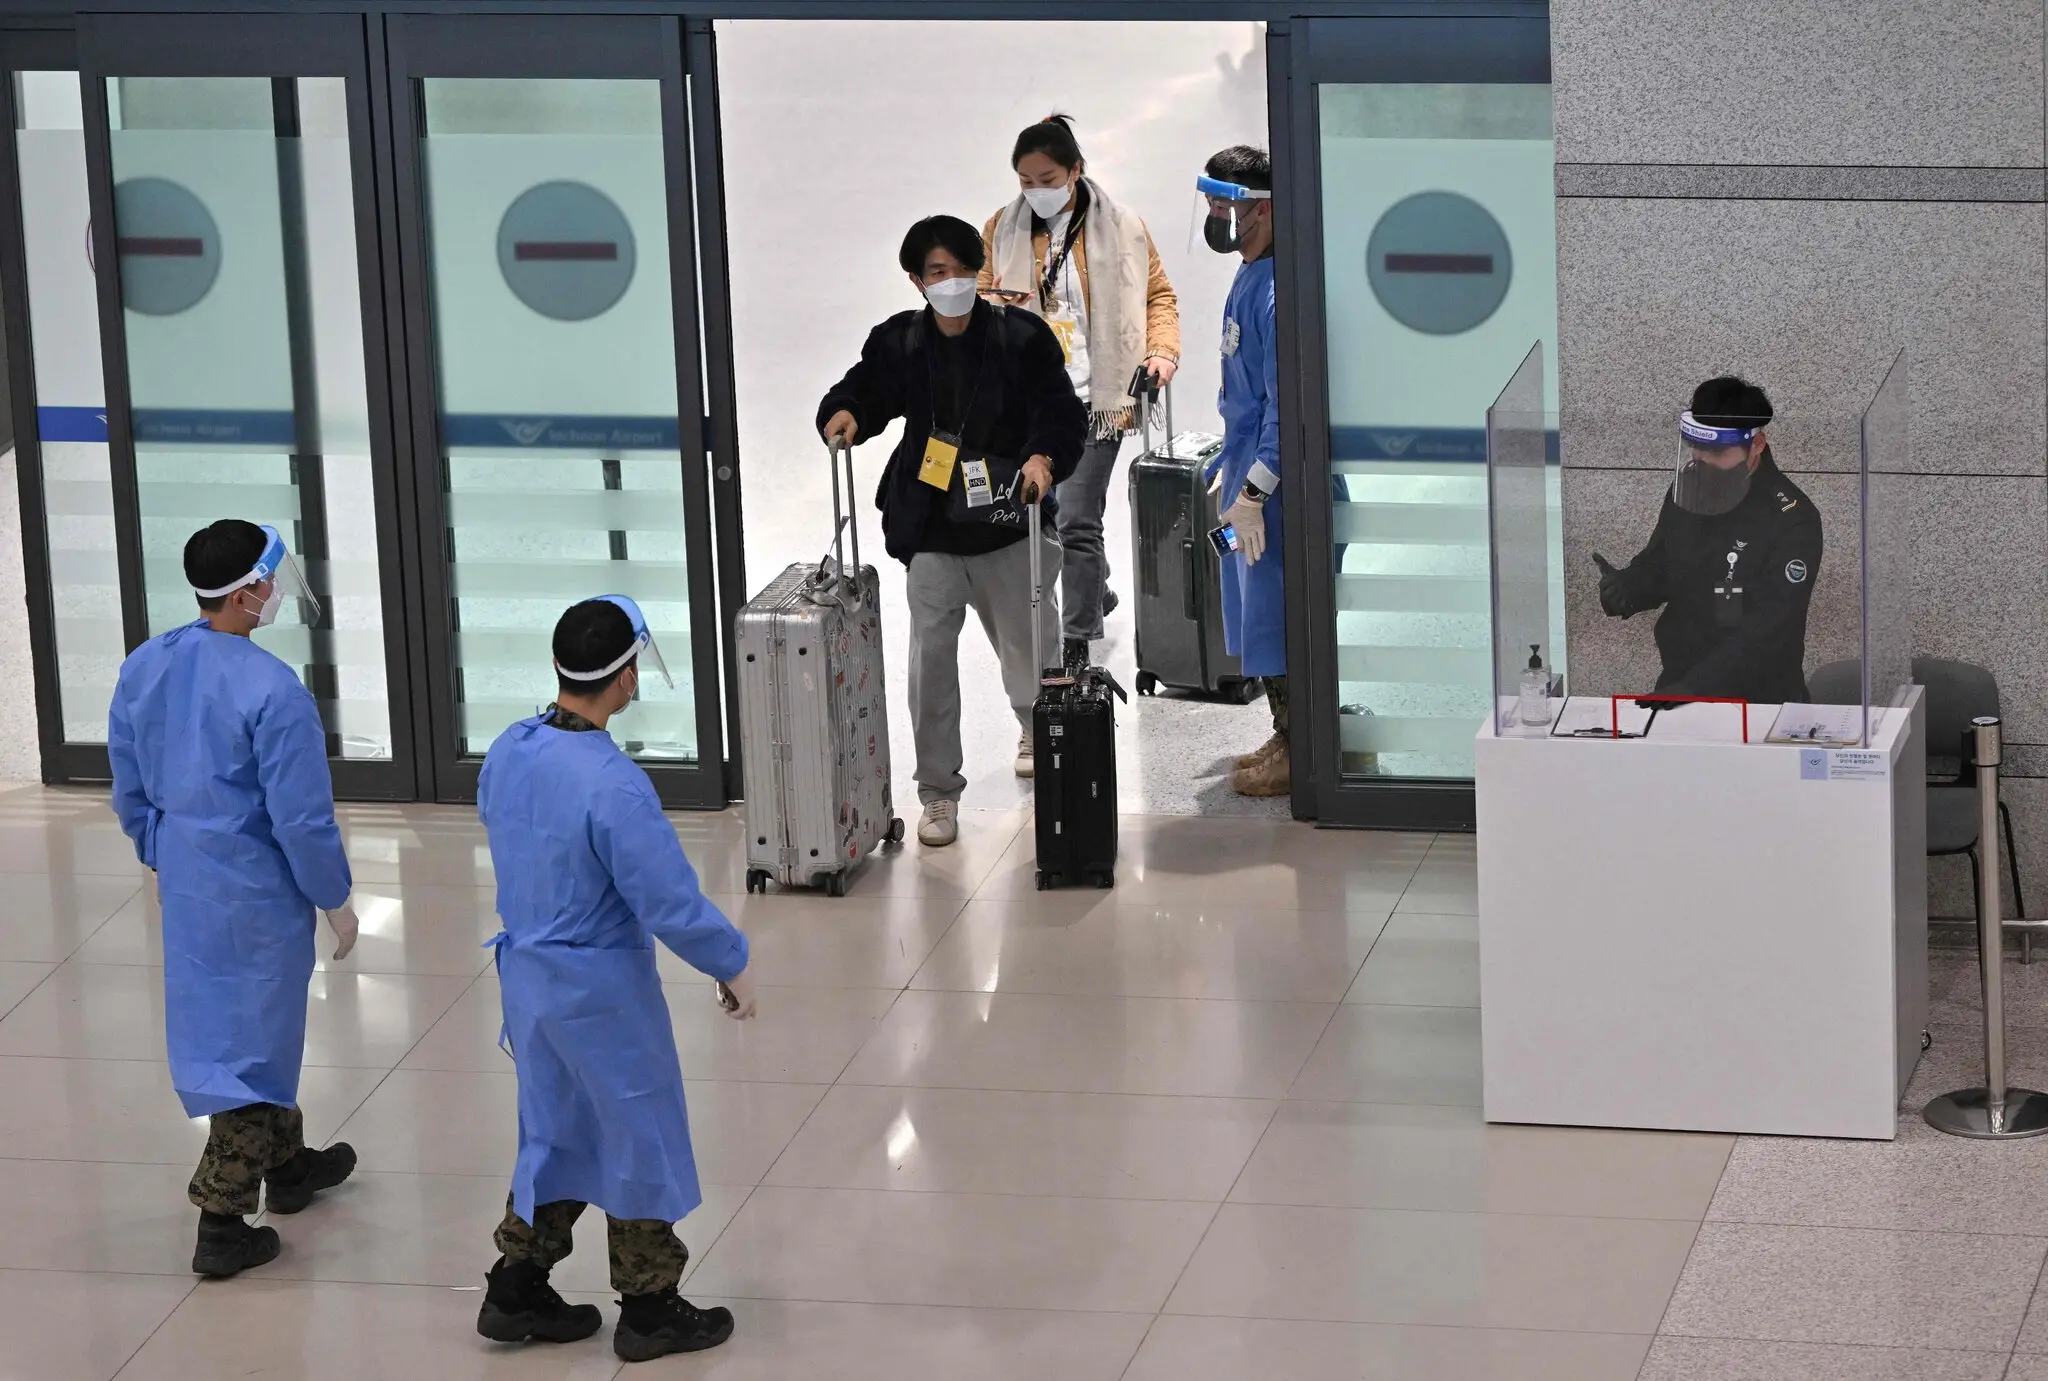 China Denounces Covid Testing Rules Imposed On Its Travelers